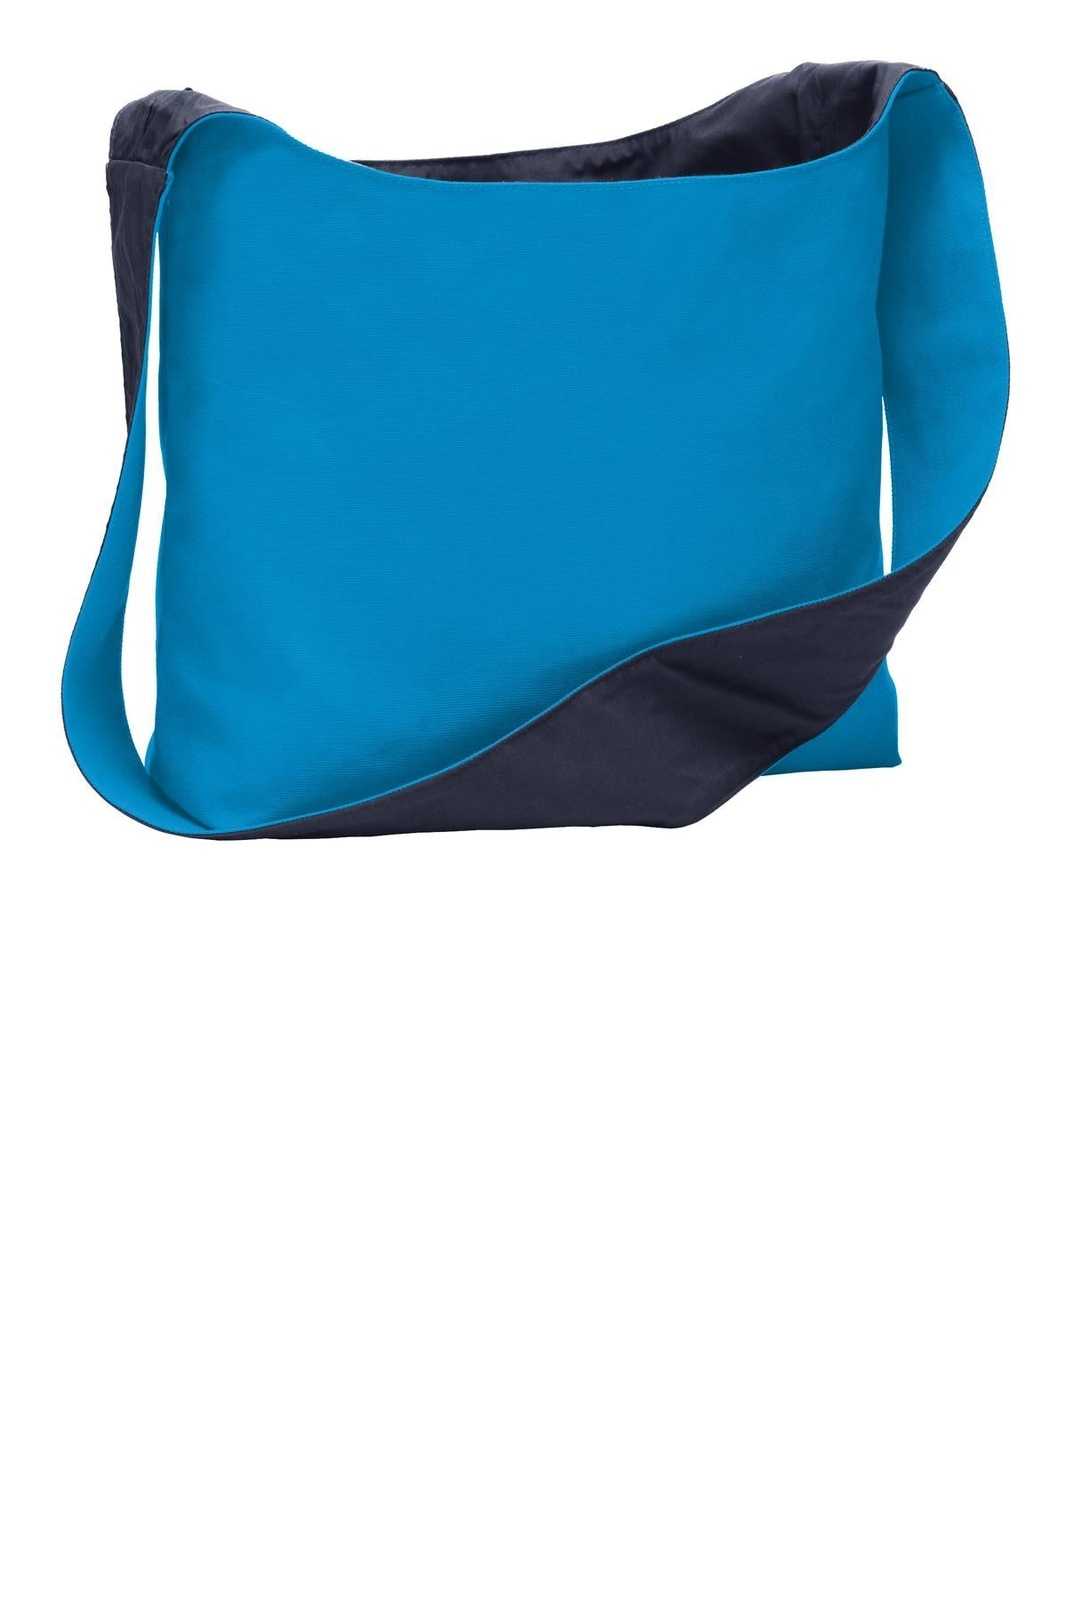 Port Authority BG405 Cotton Canvas Sling Bag - Turquoise Navy - HIT a Double - 1